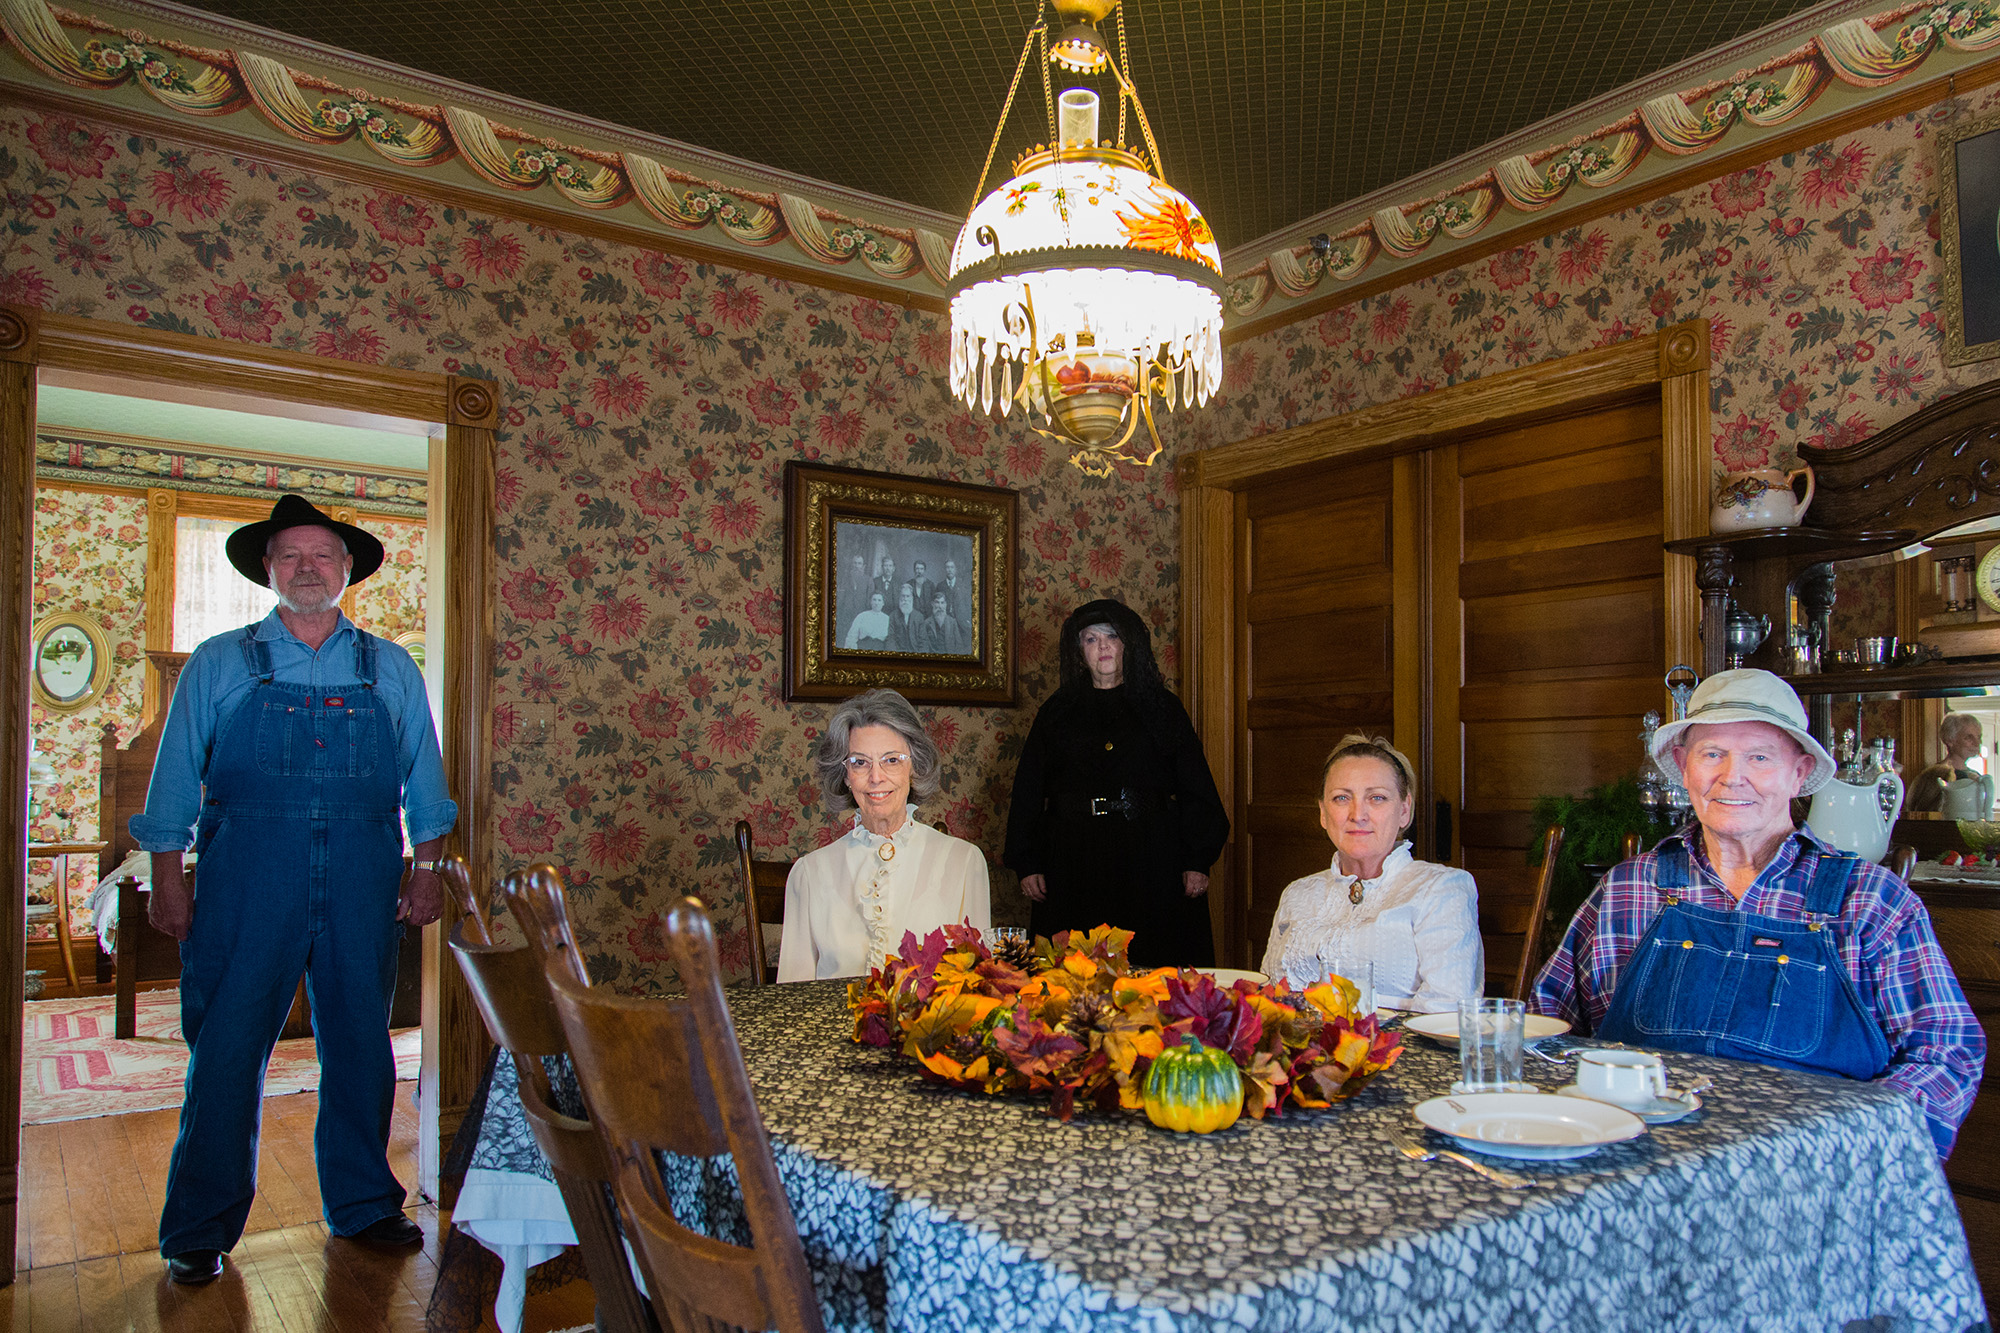 From left to right, Jim McClaren plays J.O. Speers, Kathy Fielder as a narrartor, Marilyn Stevens plays a widow, Maria Hendrix plays Emma Freeman, Ray Jakeway plays Mr. Green, are the cast that helps re-enact the events of the Sam Bayless death at the Bayl